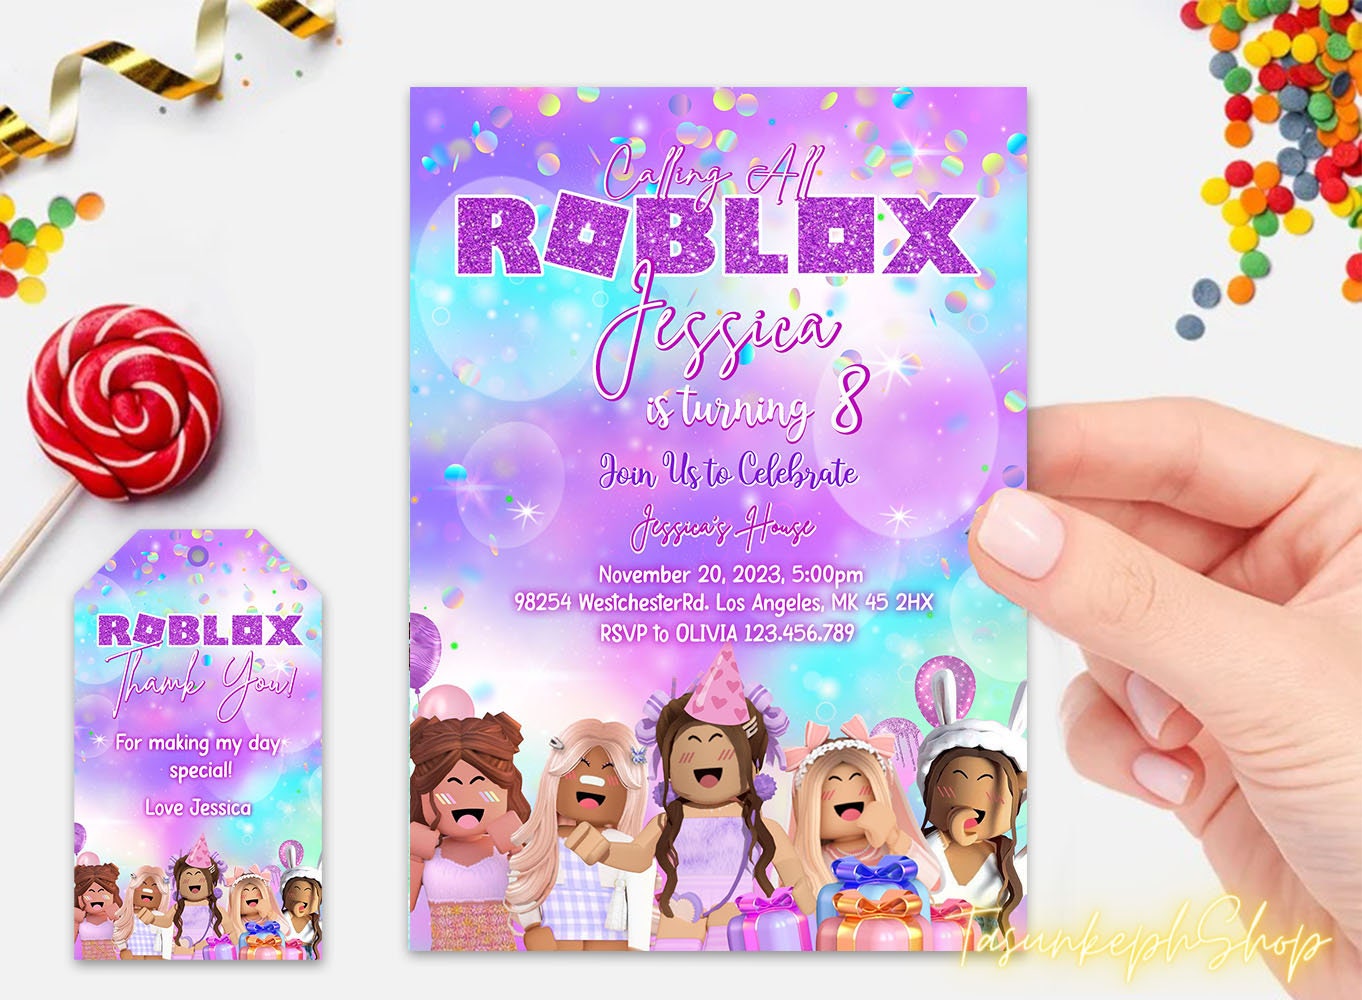 Roblox Gift Cards with Instant Email Delivery in Qatar from Nology Store